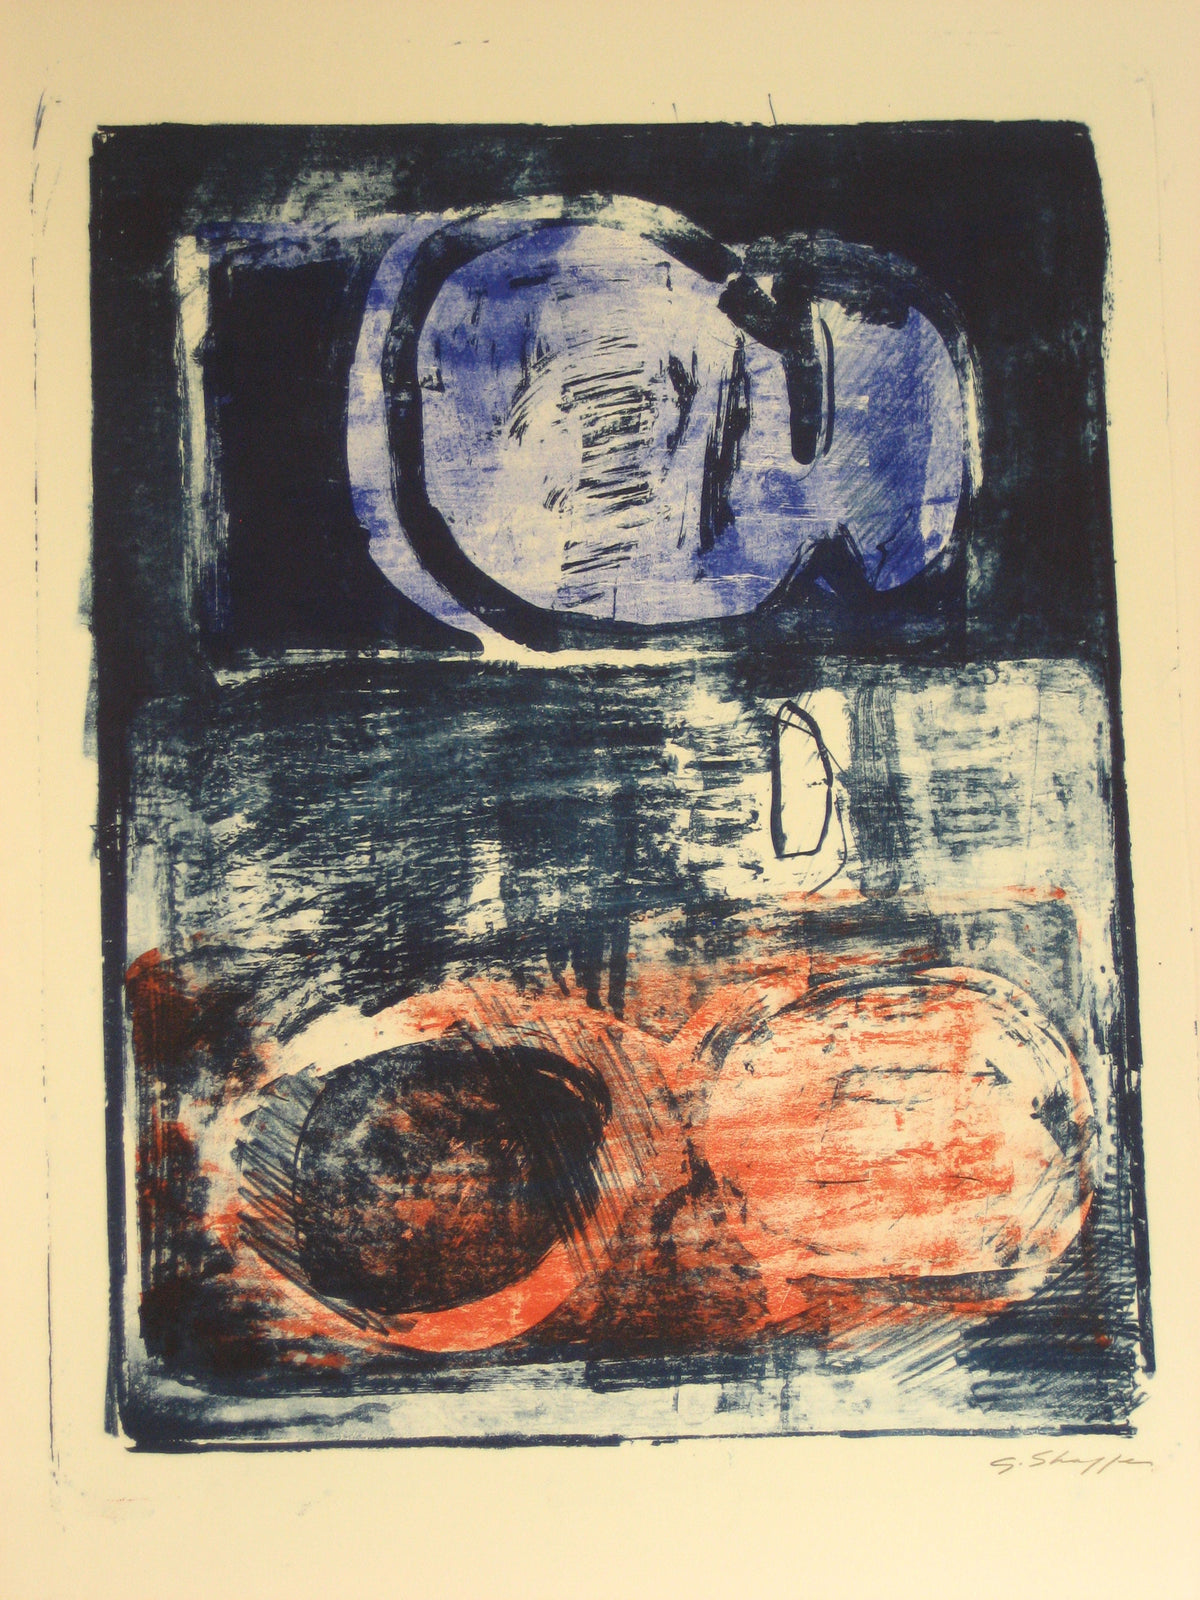 Red and Blue &lt;br&gt;1965 Lithograph &lt;br&gt;&lt;br&gt;#6414